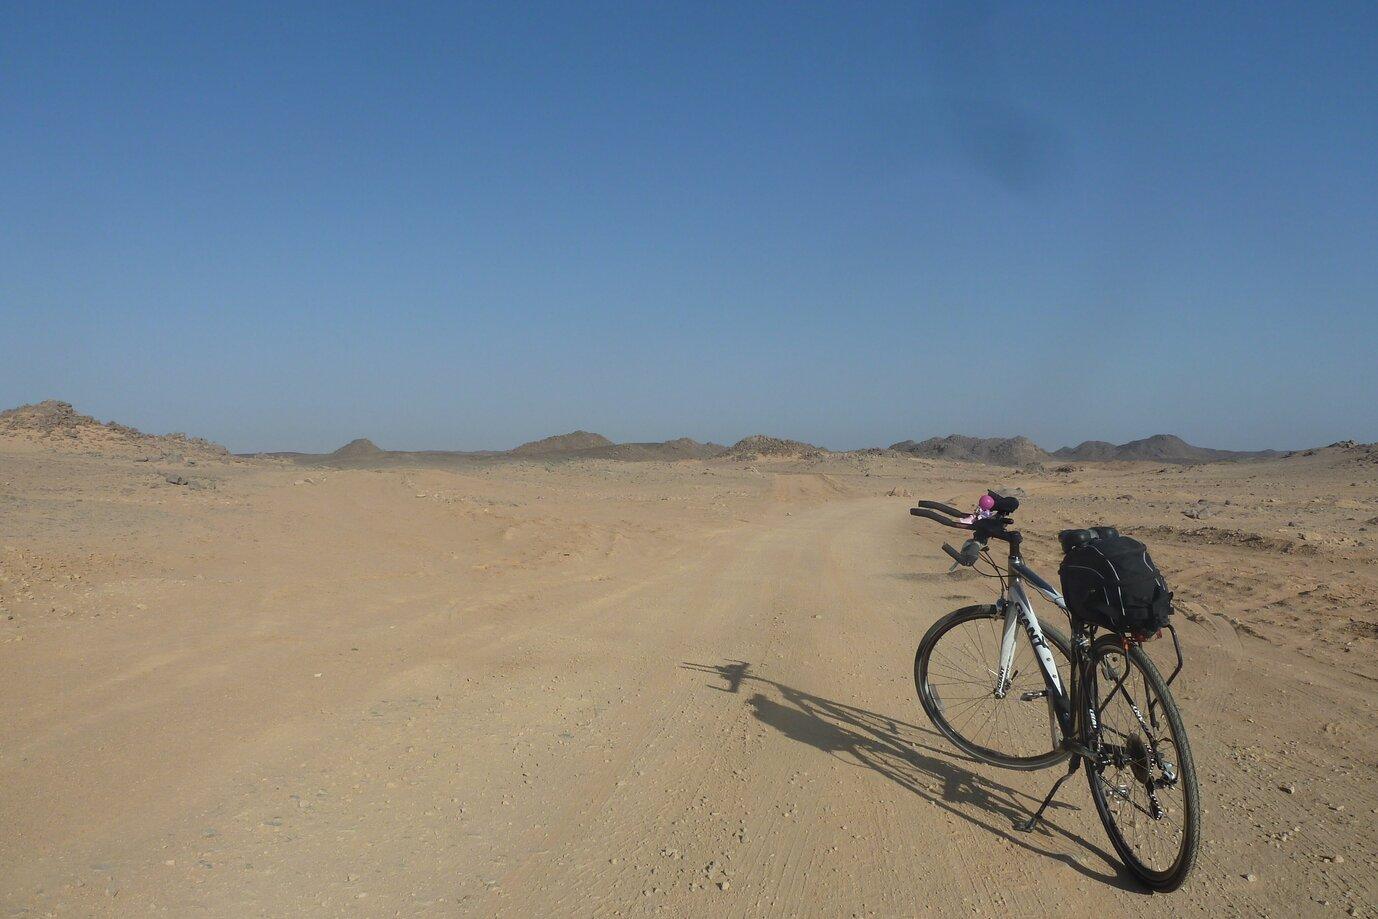 A picture of my bicycle on a dusty road in africa